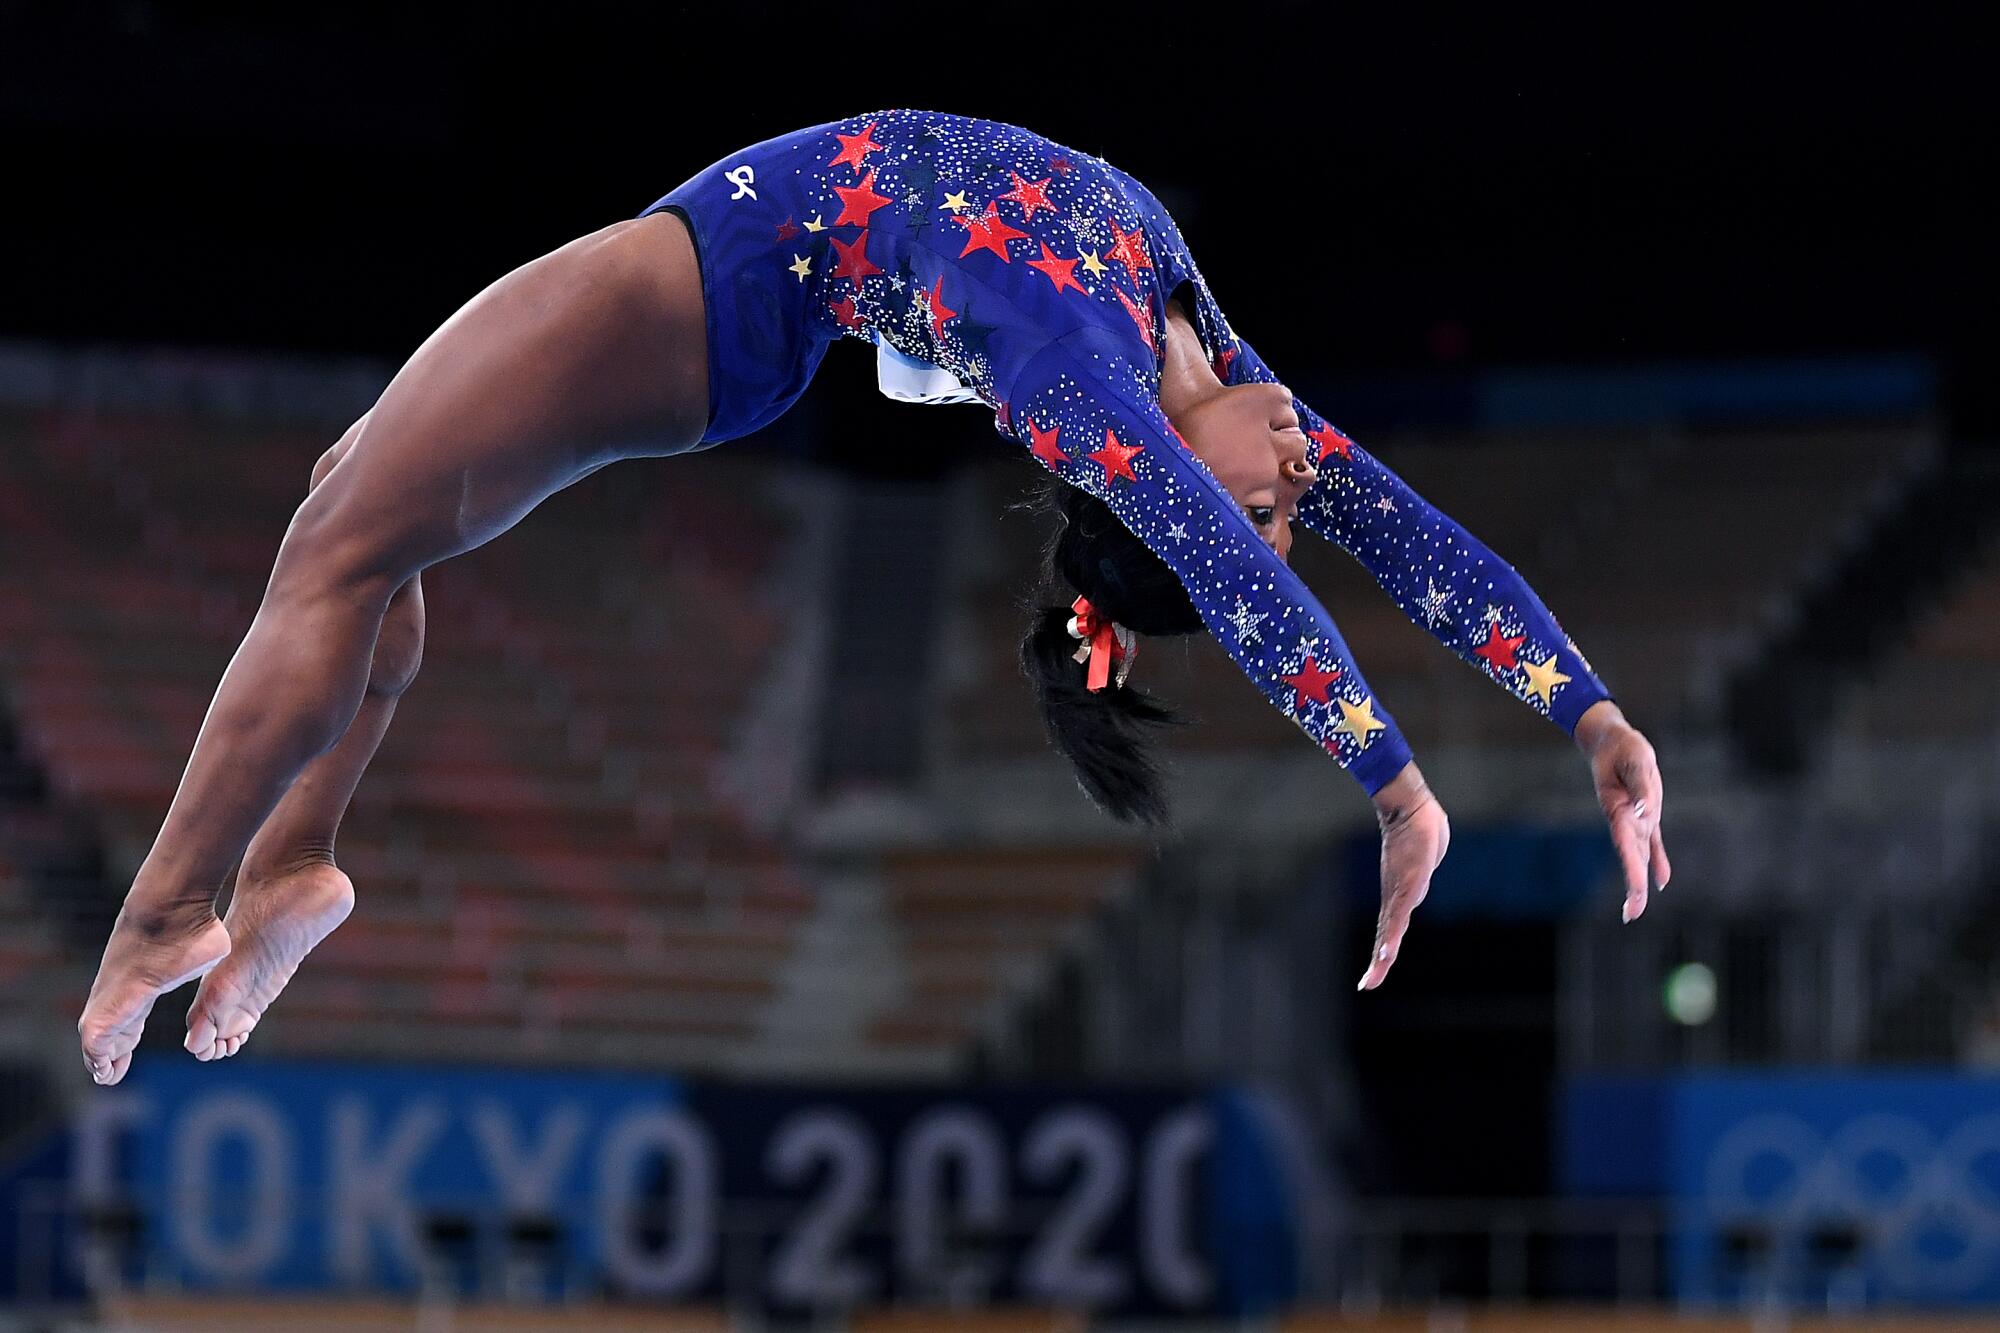 Simone Biles competes on the beam in the women's team qualifying at the 2020 Tokyo Olympics.